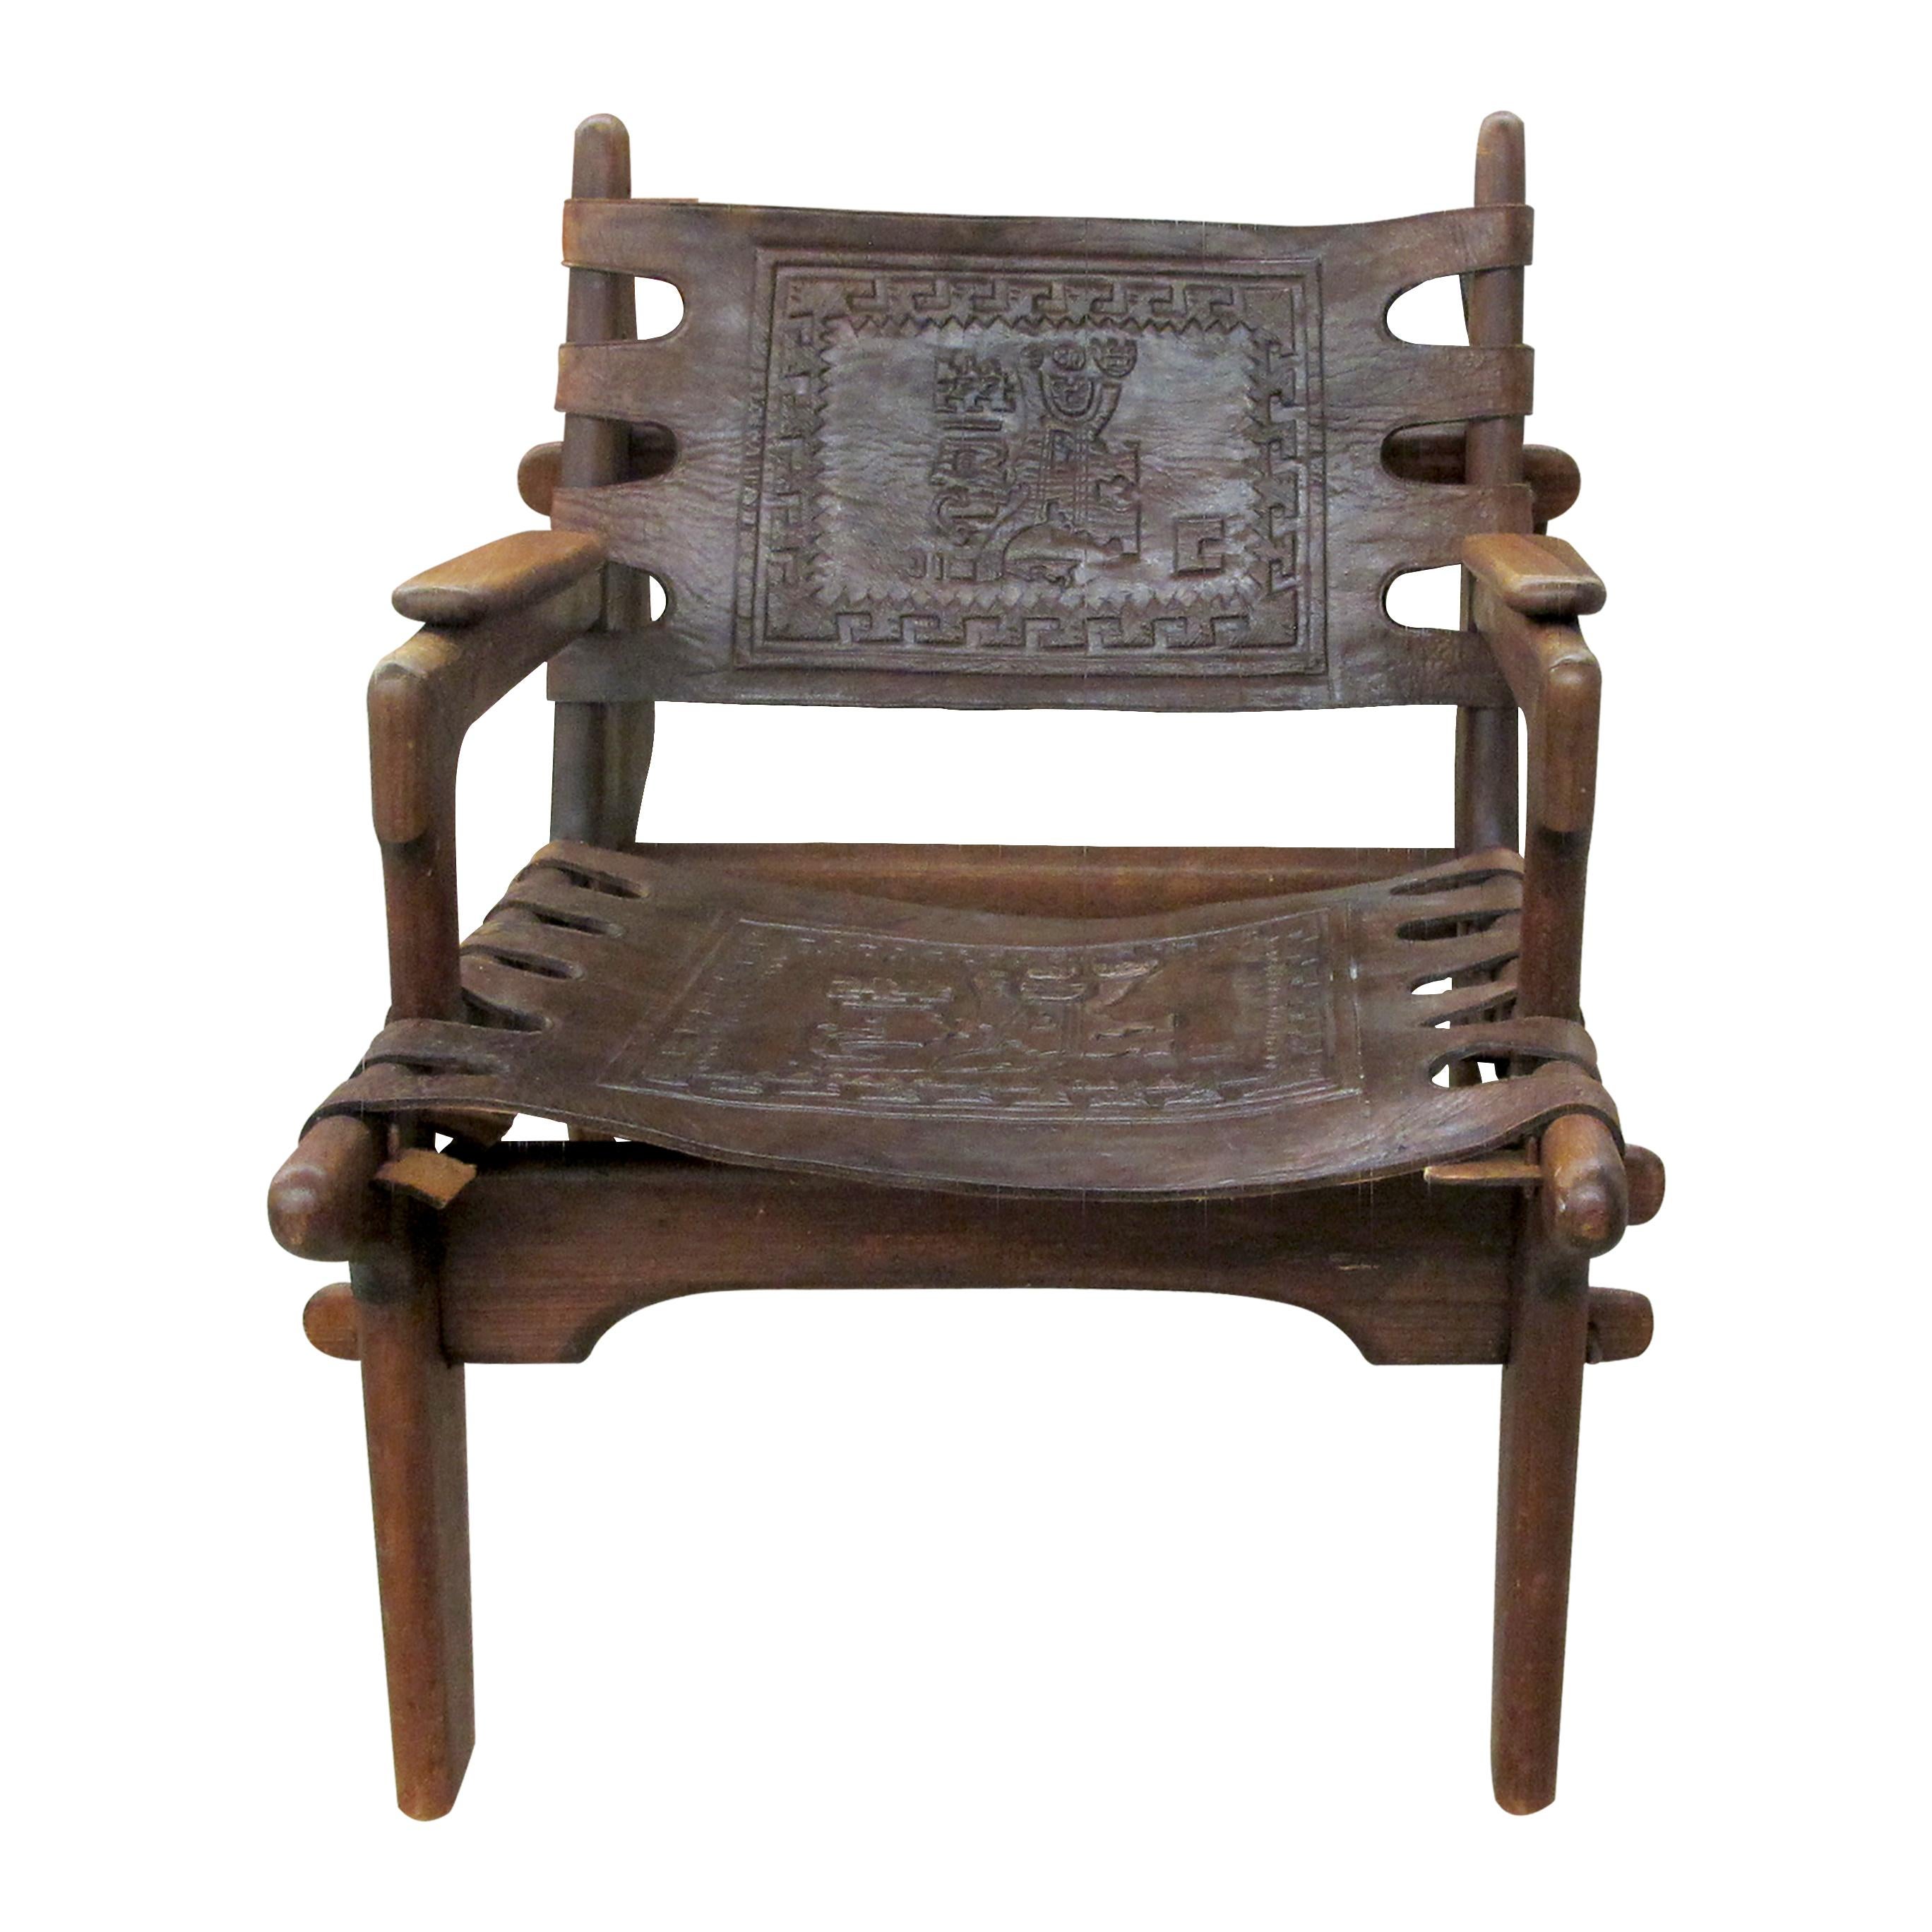 Mid-century comfortable pair of hardwood and tooled leather boasting Inca motifs designed by Angel Pazmino for Muebles De Estilo in Ecuador. The wooden frames feature interlocking joints and the leather is held together by rugged pegs. The leather